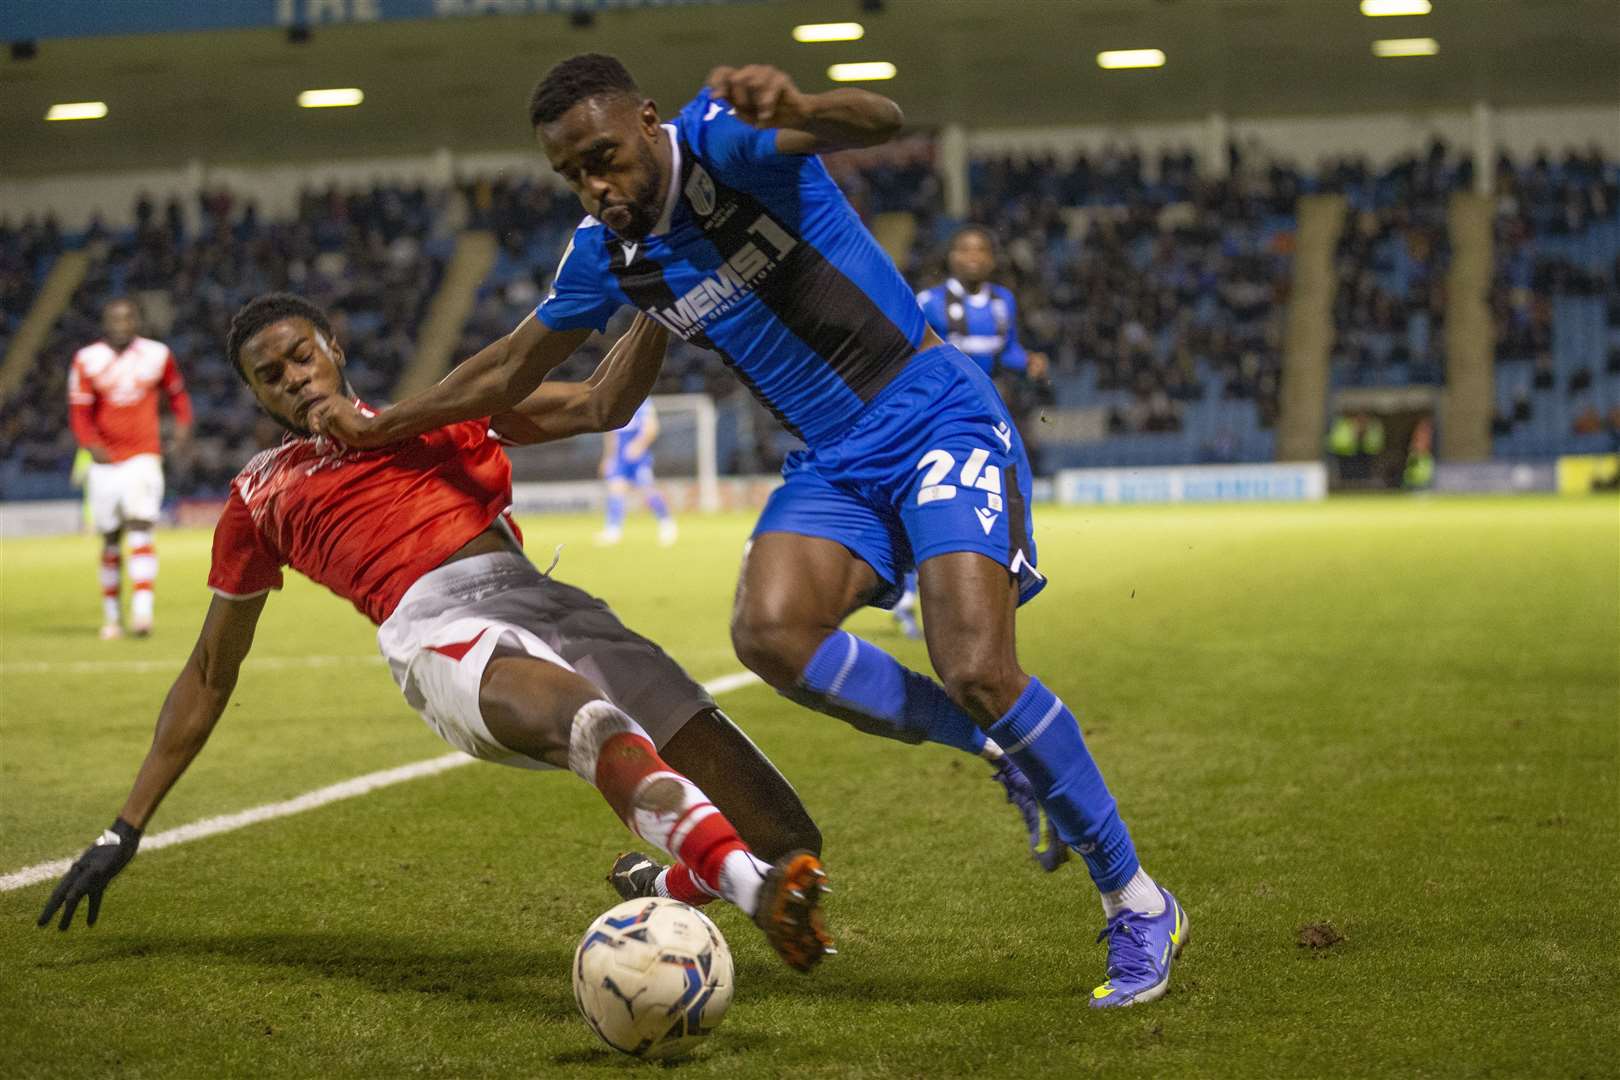 A full week of training for Mustapha Carayol will be a boost for Gillingham Picture: KPI